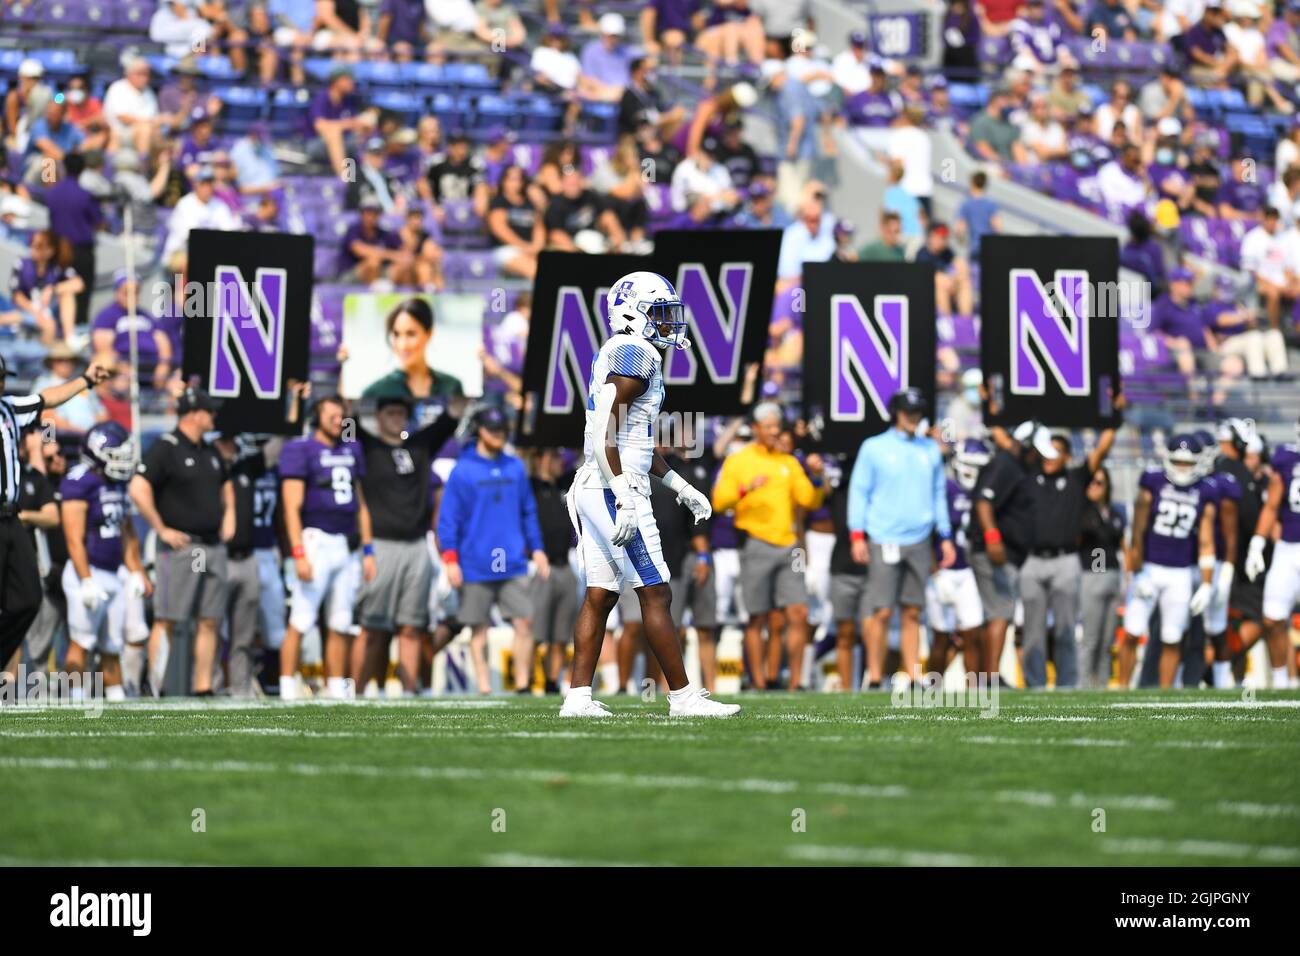 Evanston, Illinois, USA. 11th Sep, 2021. JJ Henderson #12 of the Indiana State Sycamores in action during the NCAA football game between the Northwestern Wildcats vs Indiana State Sycamores at Ryan Field in Evanston, Illinois. Dean Reid/CSM/Alamy Live News Stock Photo